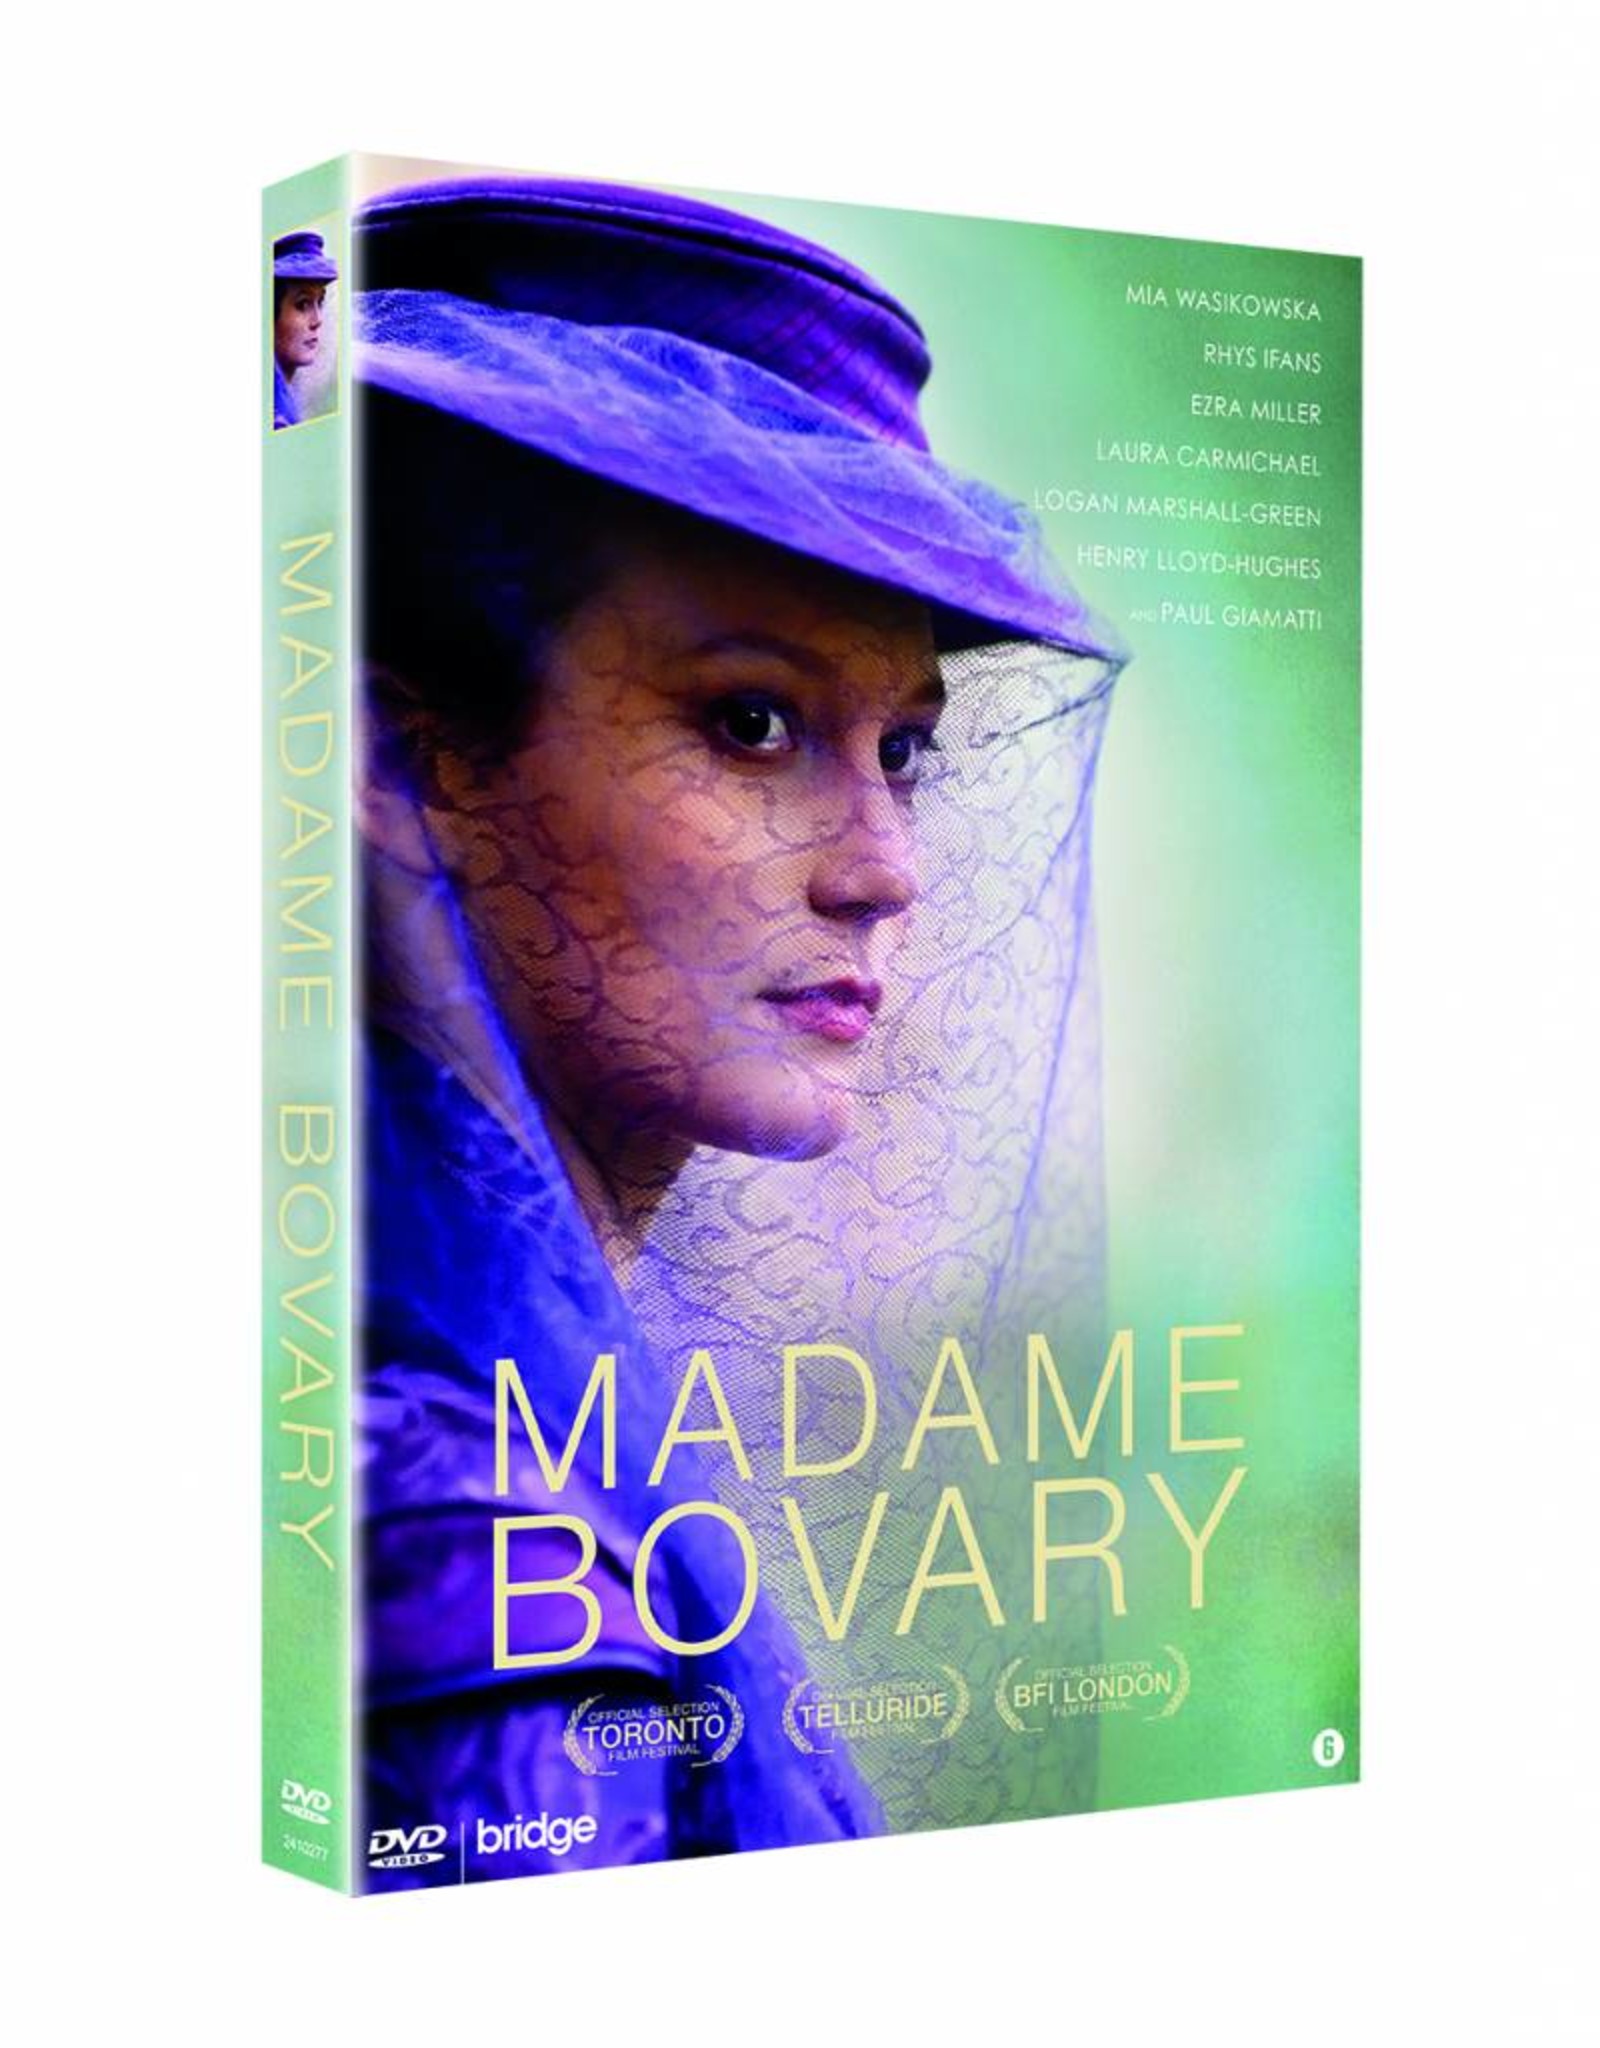 Madame Bovary for ipod download